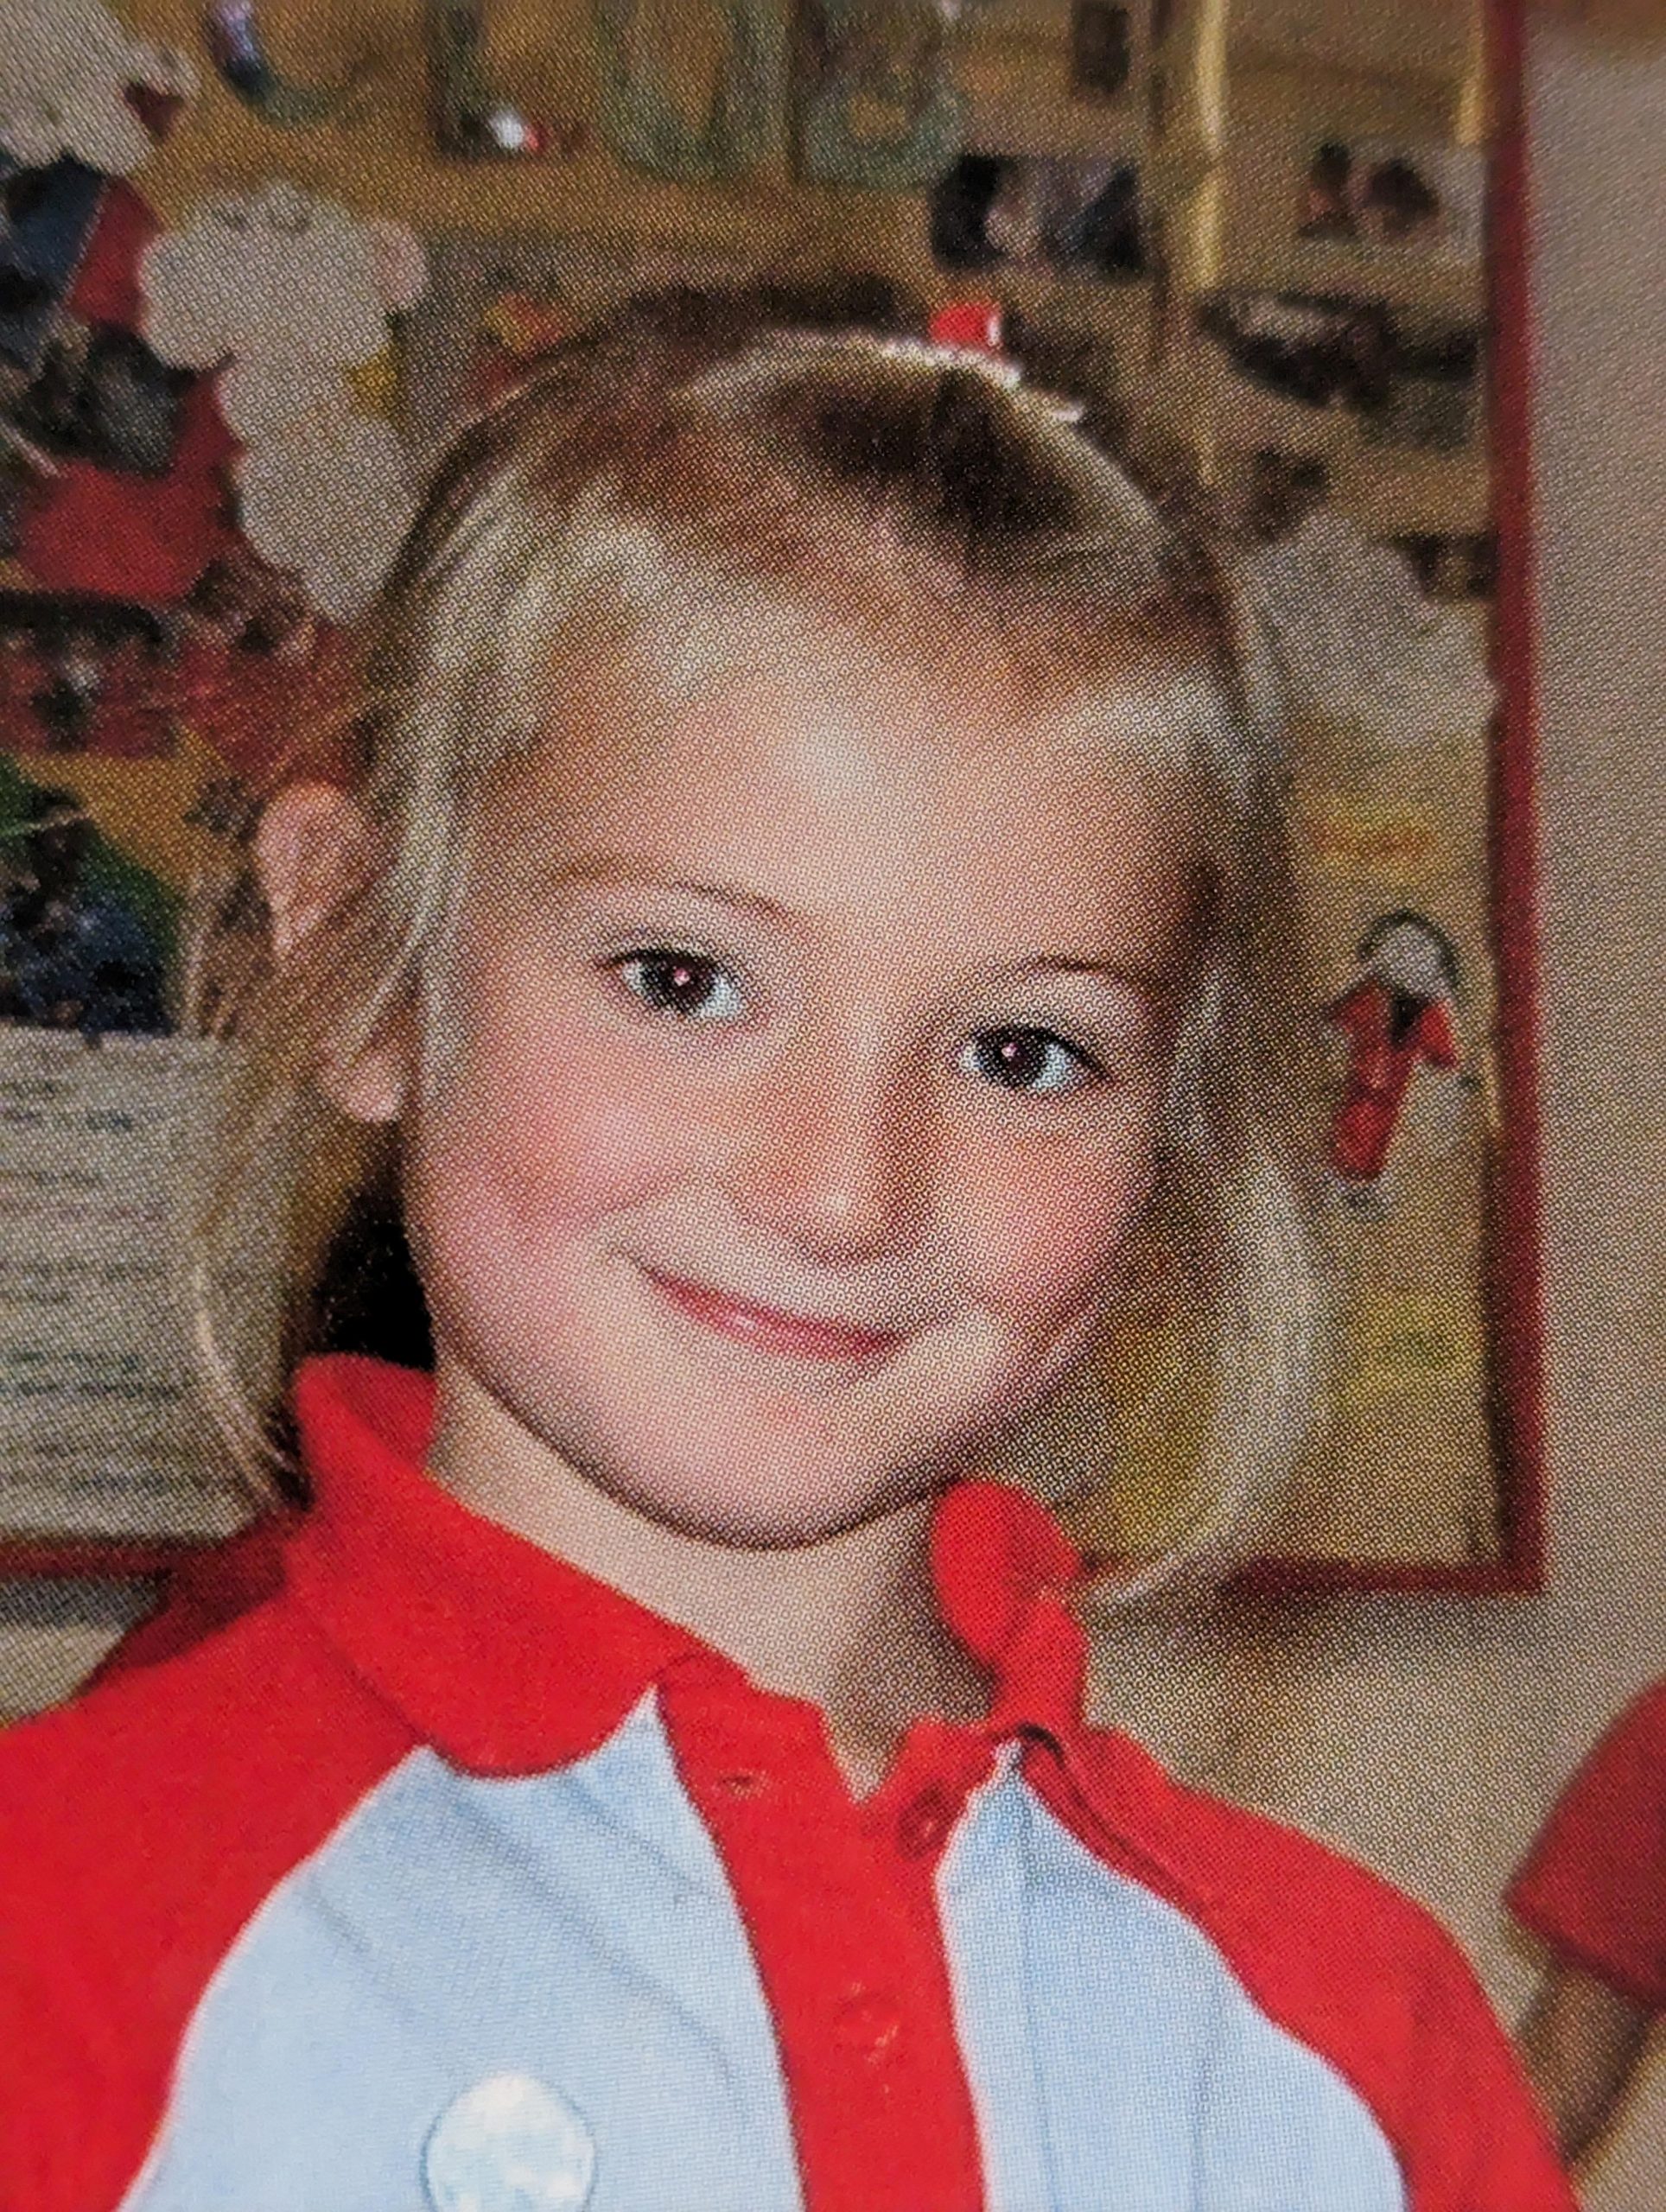 Belle Whitely, SLC coordinator for Yorkshire and Humberside. She is 8 years old in this picture and has blond hair, tied in a ponytail. She is wearing a red and white jumper, and smiling at the camera.